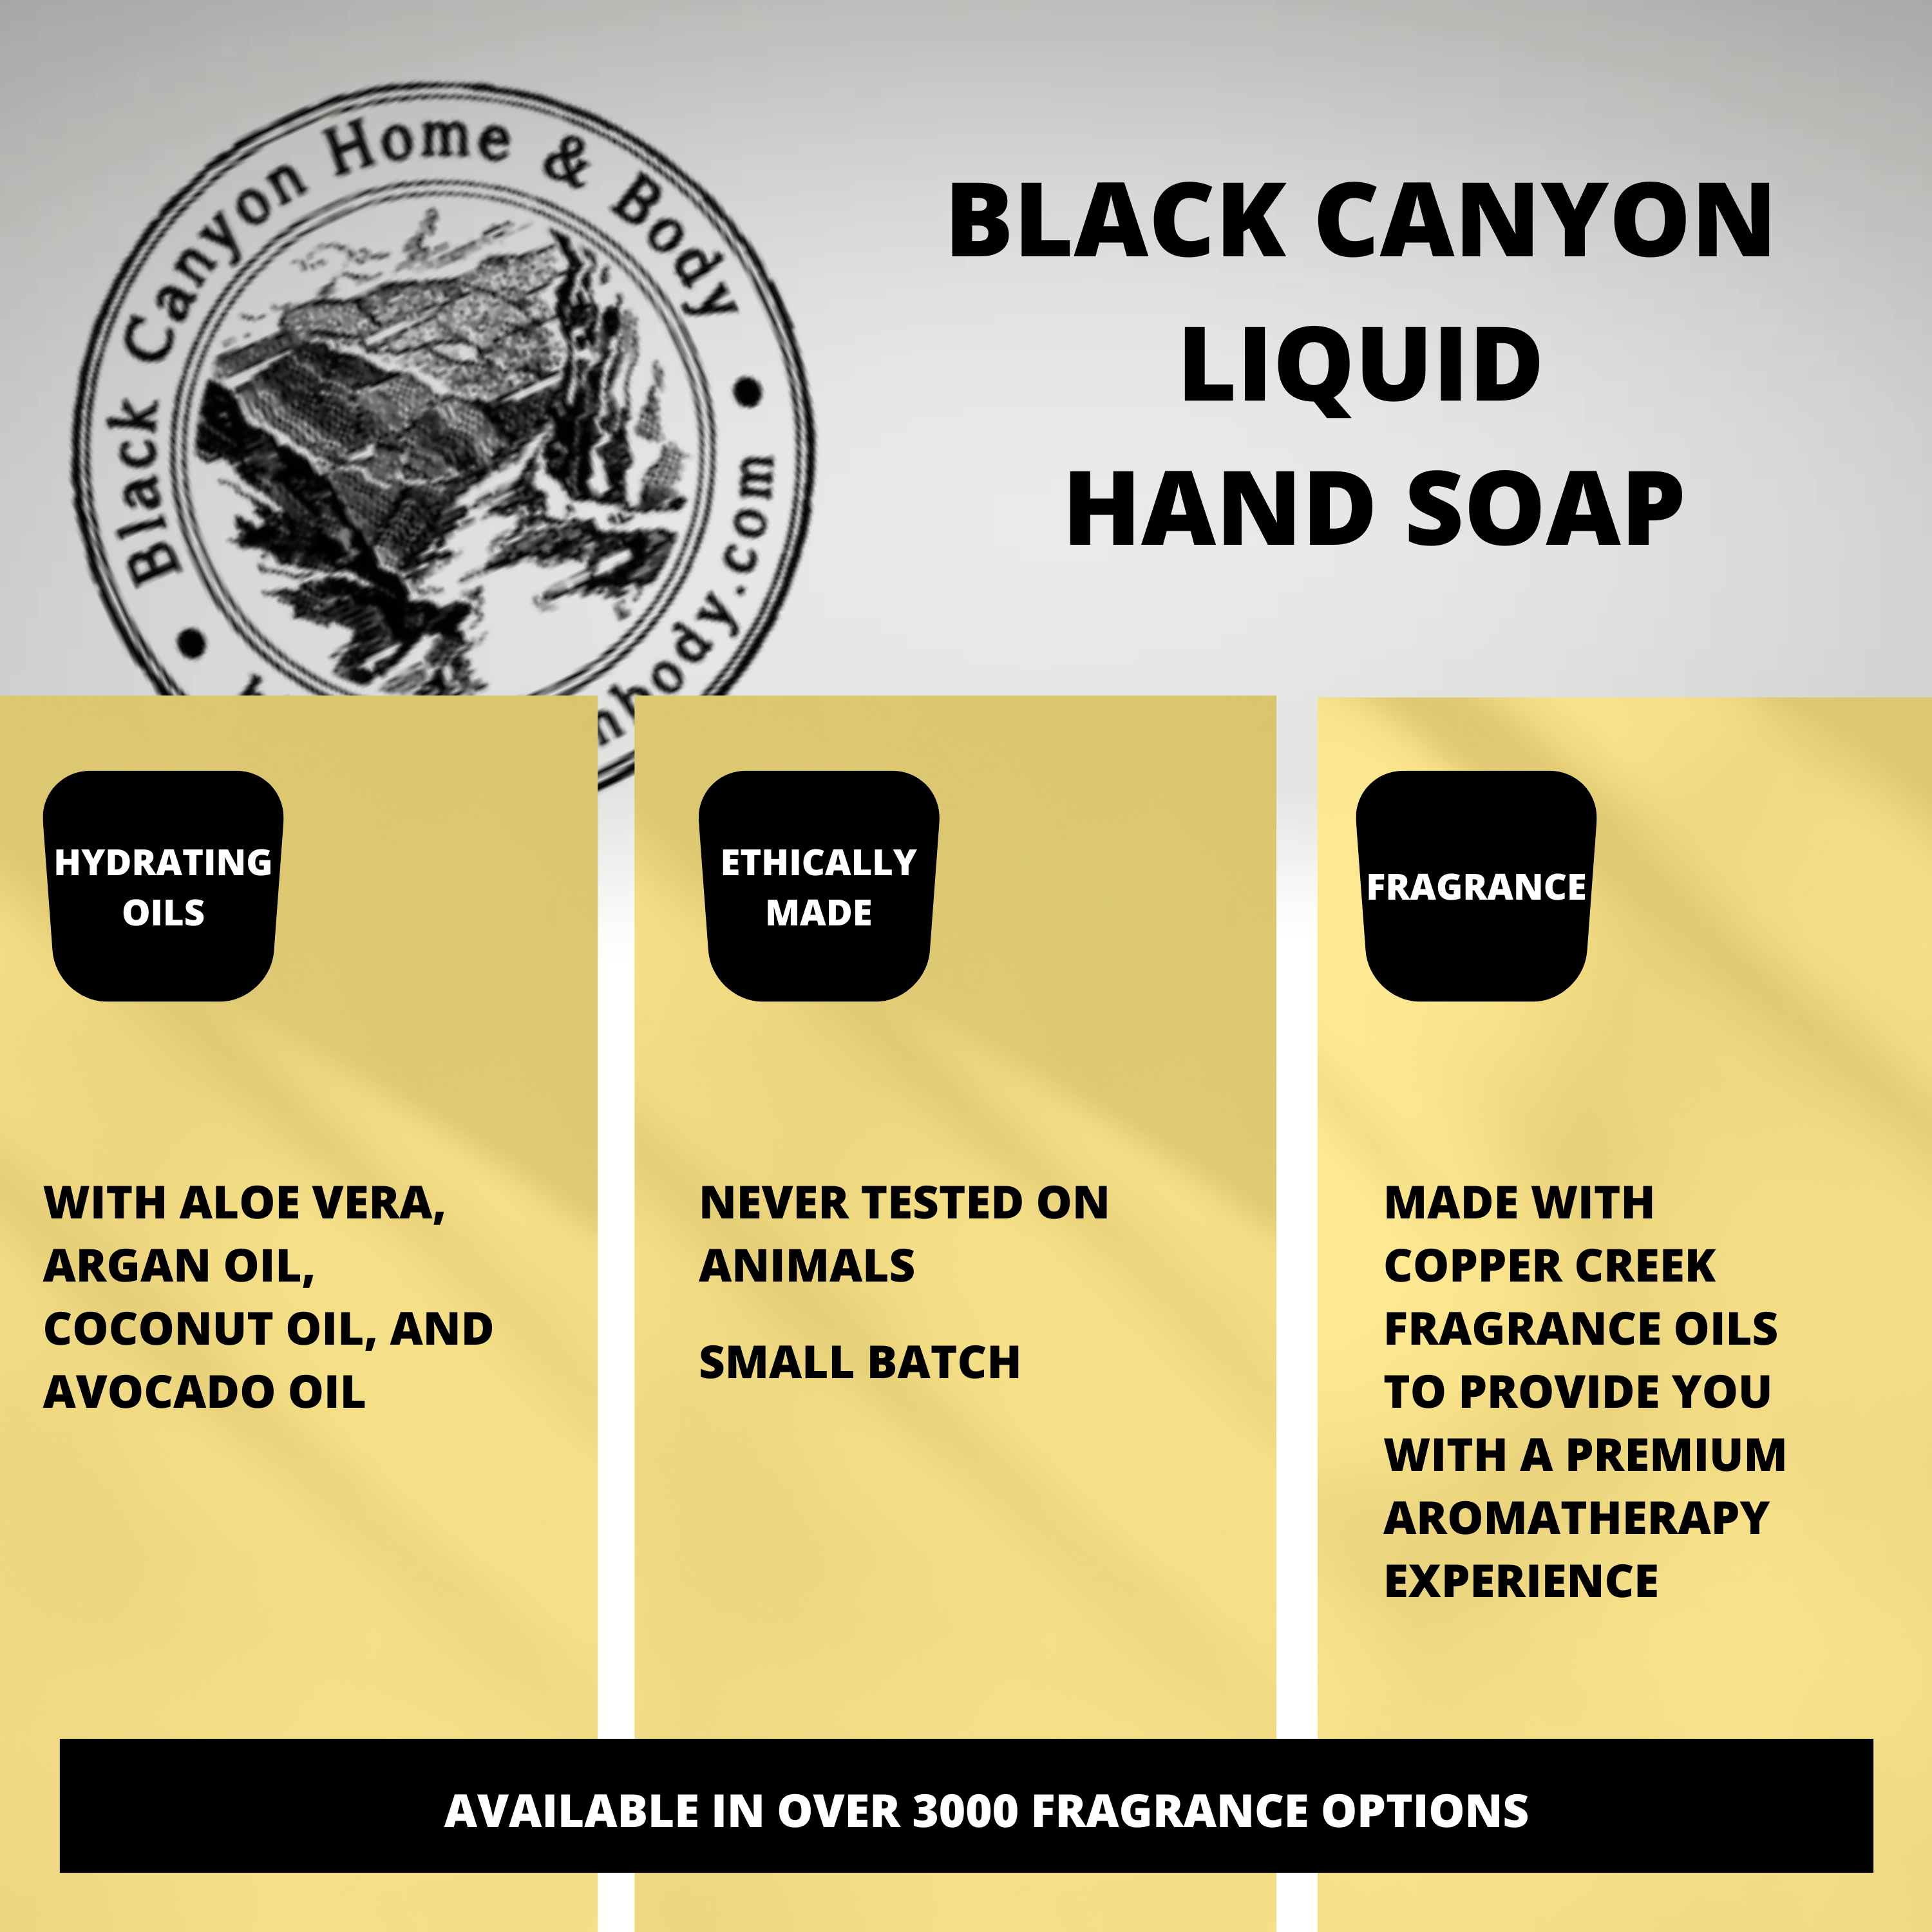 Black Canyon Friday Scented Liquid Hand Soap